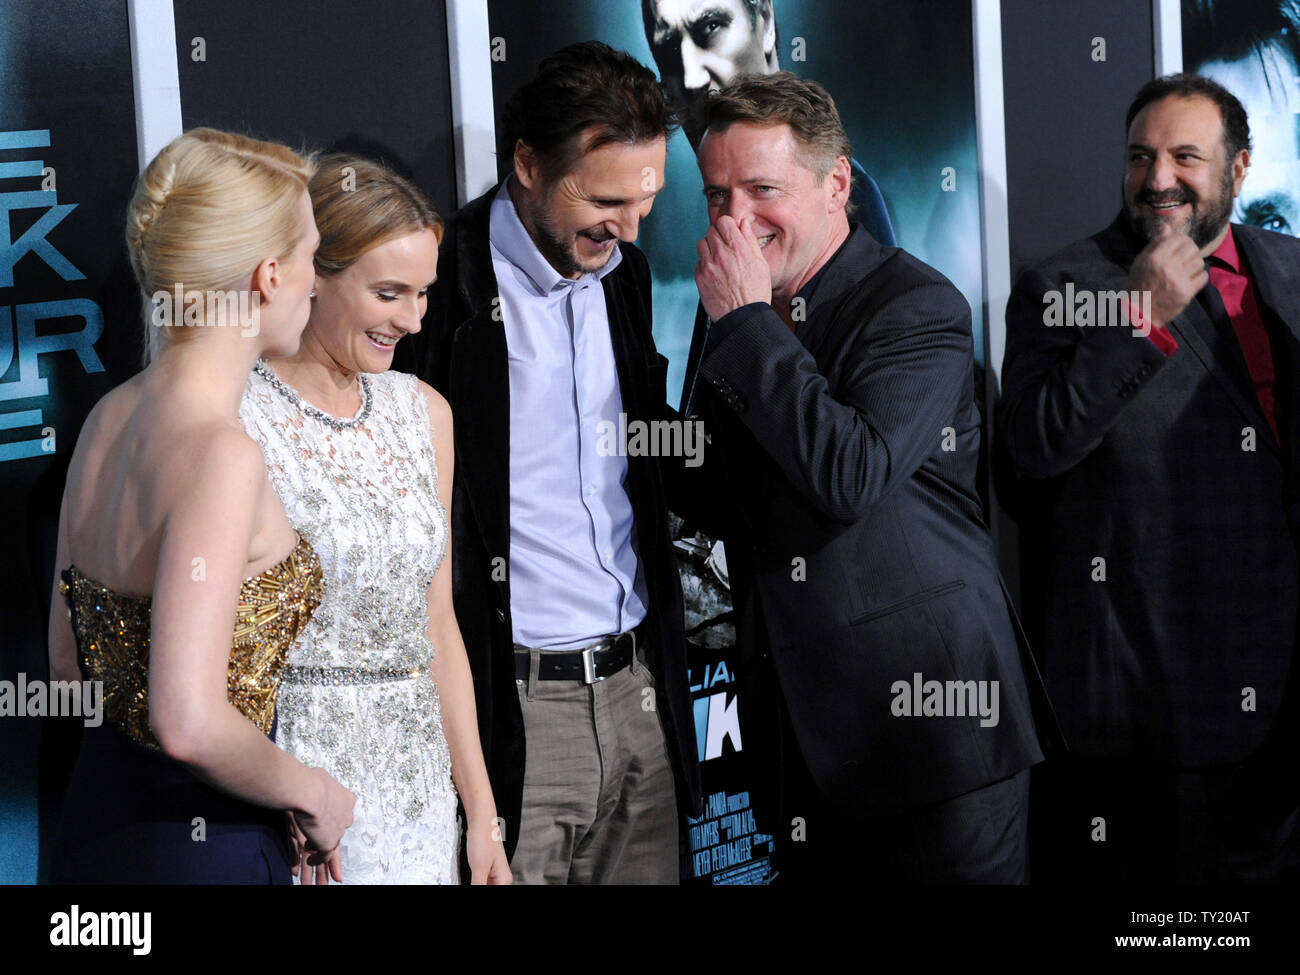 January Jones, Diane Kruger, Liam Neeson and Aidan Quinn (L-R), cast members in the motion picture thriller 'Unknown', share a laugh on the red carpet as producer Joel Sil;ver (R) looks on during the premiere of the film at The Mann Village Theatre in Los Angeles on February 16, 2011.  UPI/Jim Ruymen Stock Photo